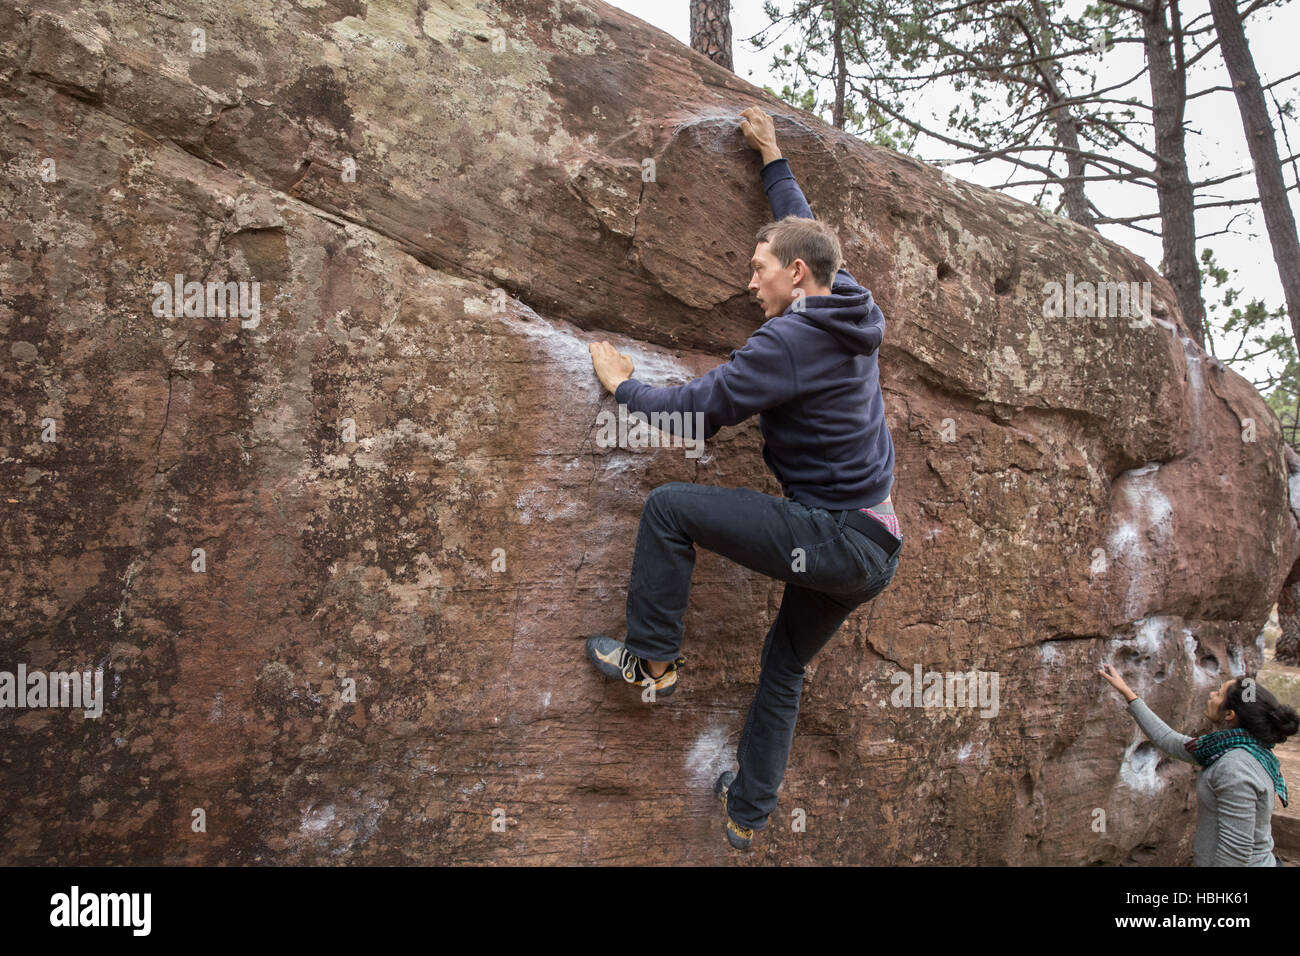 Climbing in the forest at Albarracin, in Spain Stock Photo